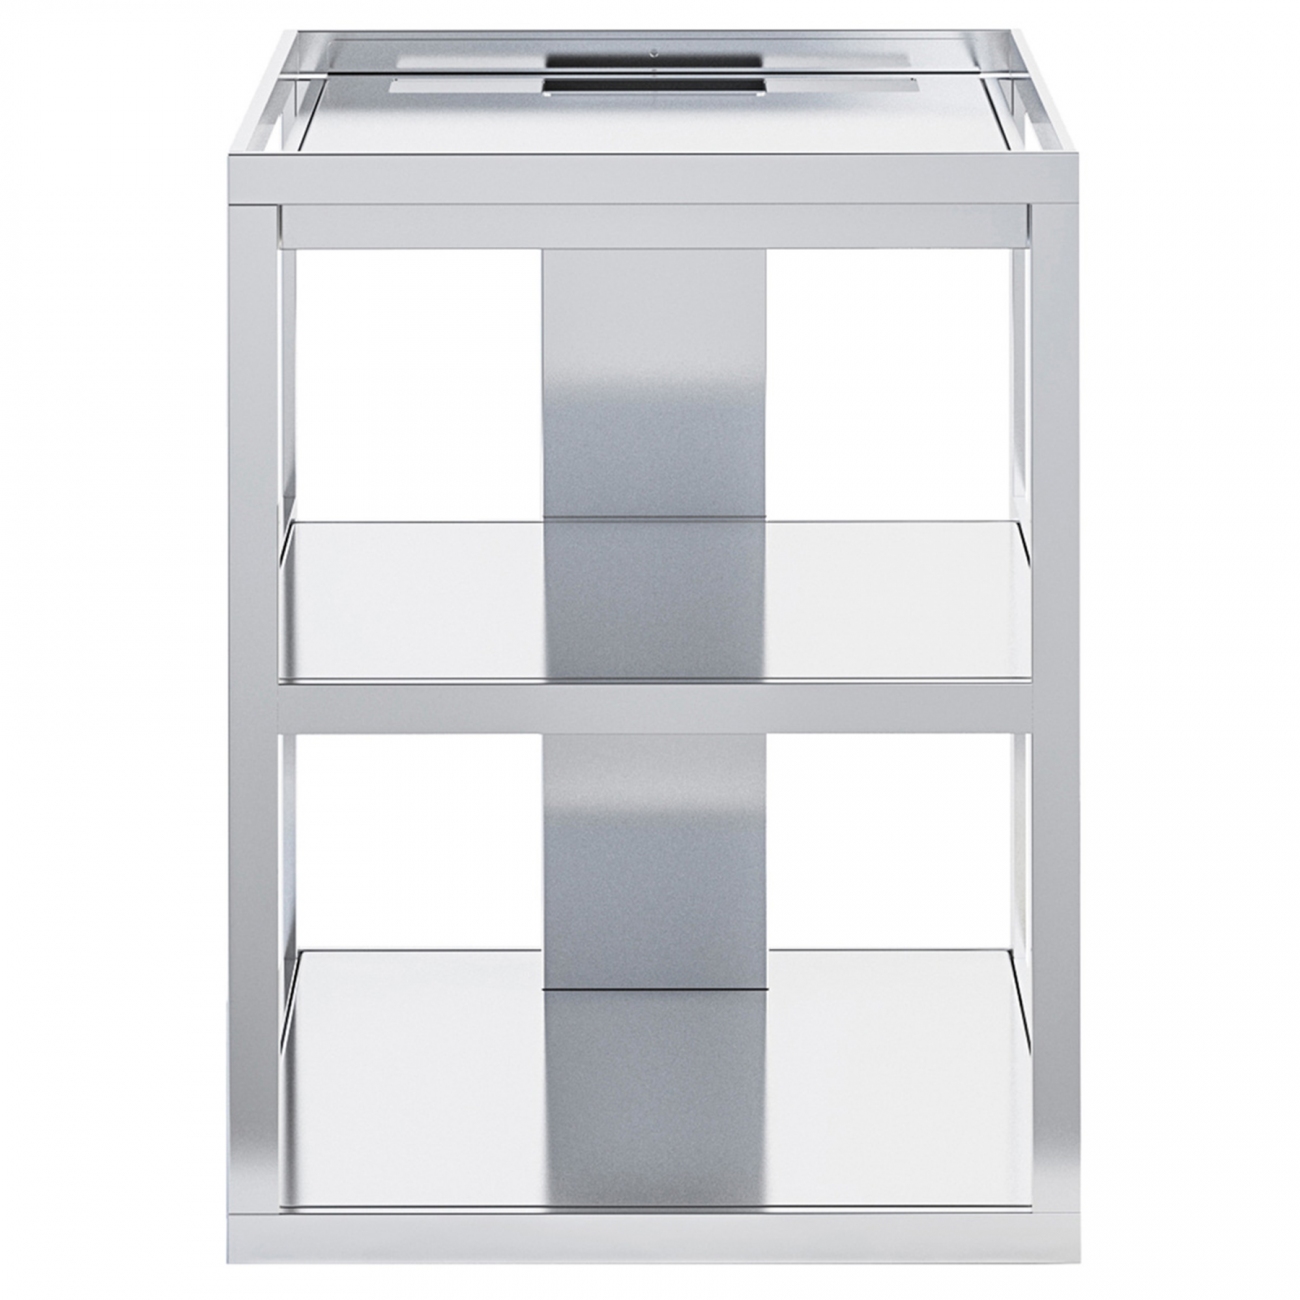 Röshults Open Kitchen Frame 50 Brushed Stainless Steel